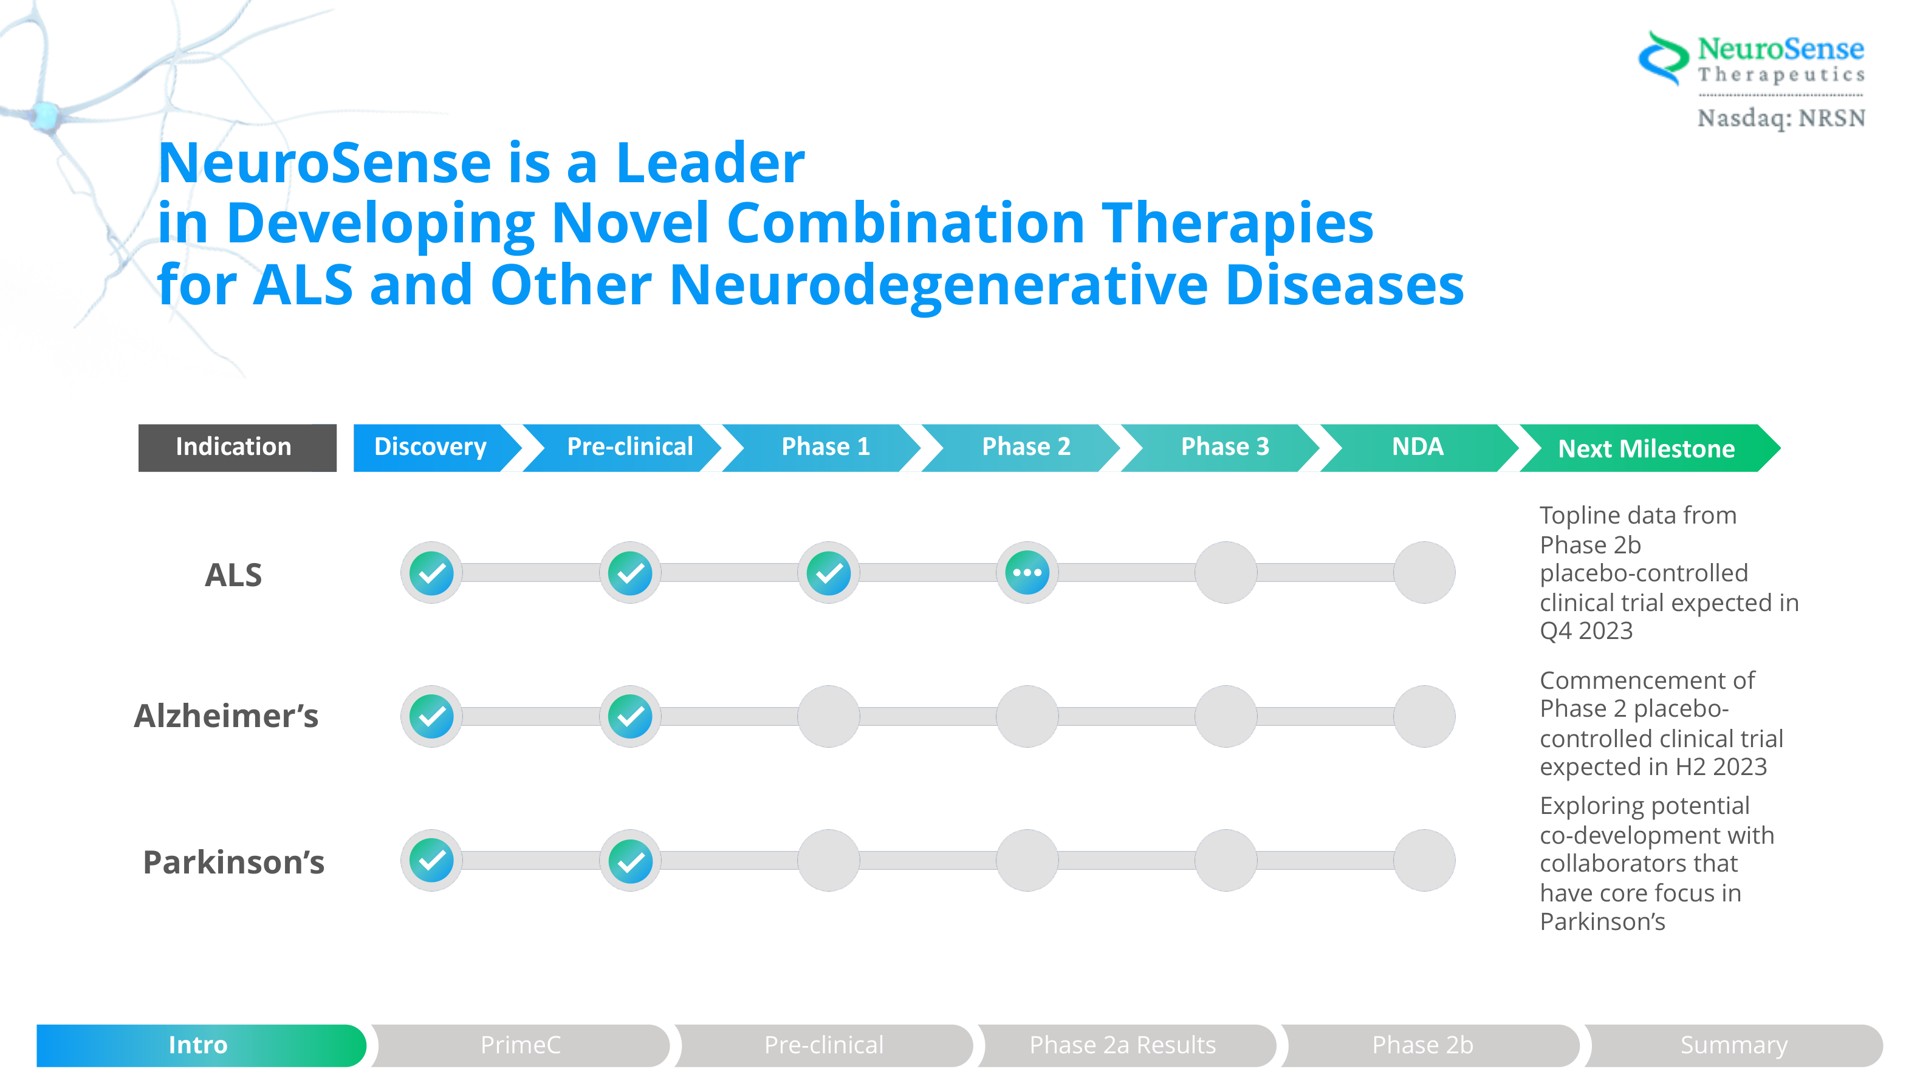 is a leader in developing novel combination therapies for als and other neurodegenerative diseases | NeuroSense Therapeutics